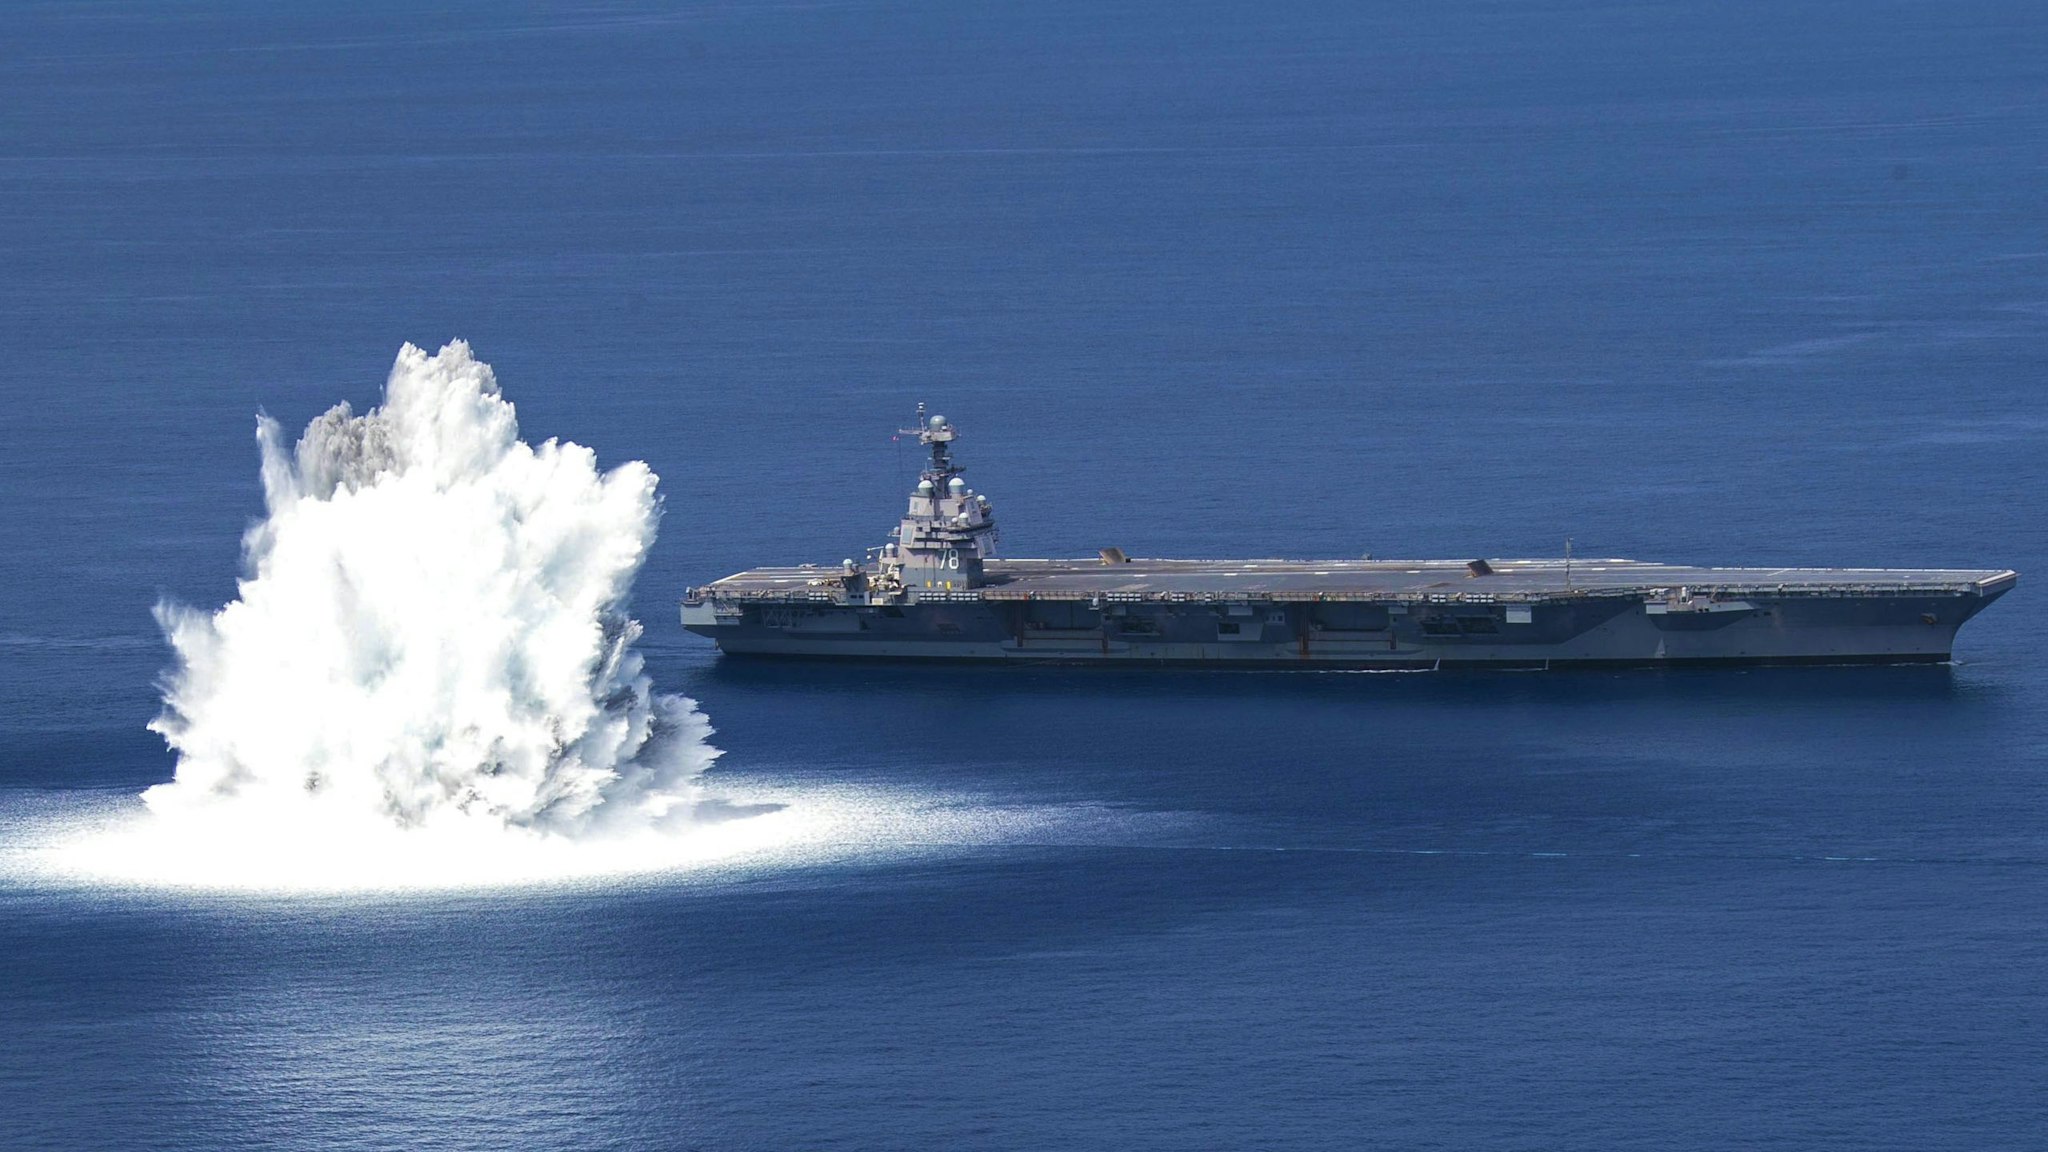 The aircraft carrier USS Gerald R. Ford (CVN 78) completes the first scheduled explosive event of Full Ship Shock Trials while underway in the Atlantic Ocean, June 18, 2021. The U.S. Navy conducts shock trials of new ship designs using live explosives to confirm that our warships can continue to meet demanding mission requirements under harsh conditions they might encounter in battle.